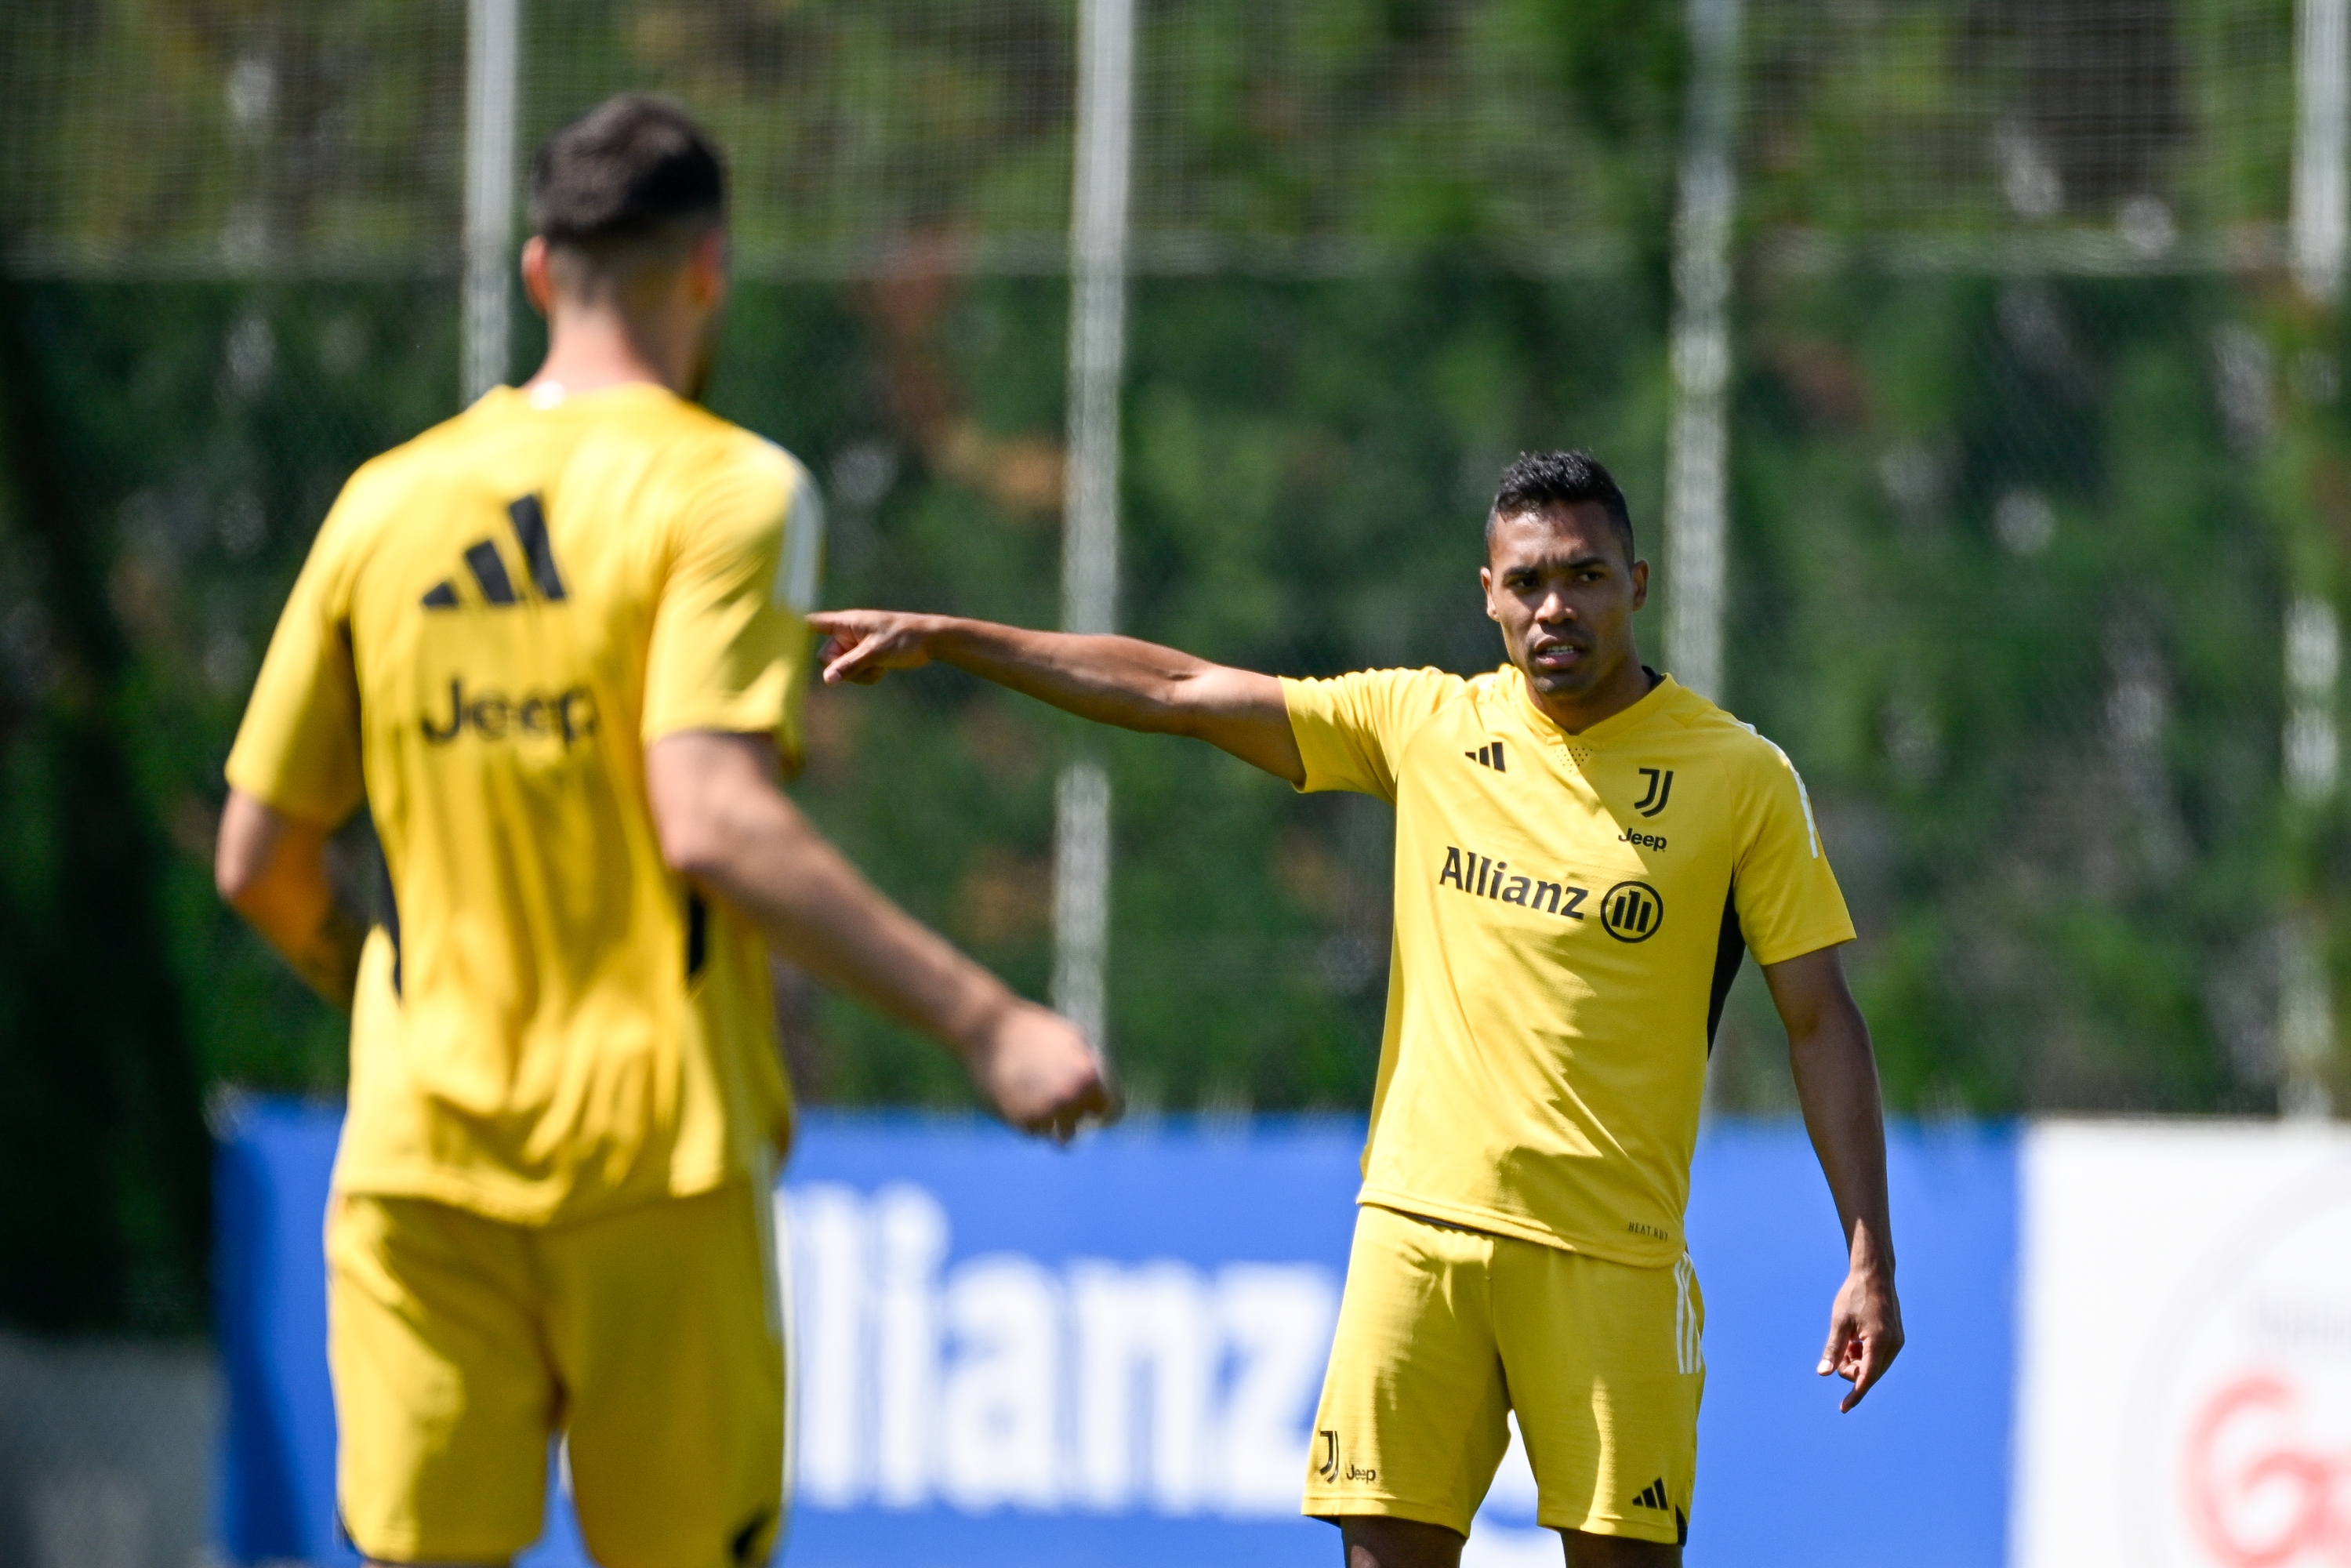 TURIN, ITALY - MAY 19: Alex Sandro of Juventus during a training session at JTC on May 19, 2024 in Turin, Italy.  (Photo by Daniele Badolato - Juventus FC/Juventus FC via Getty Images)